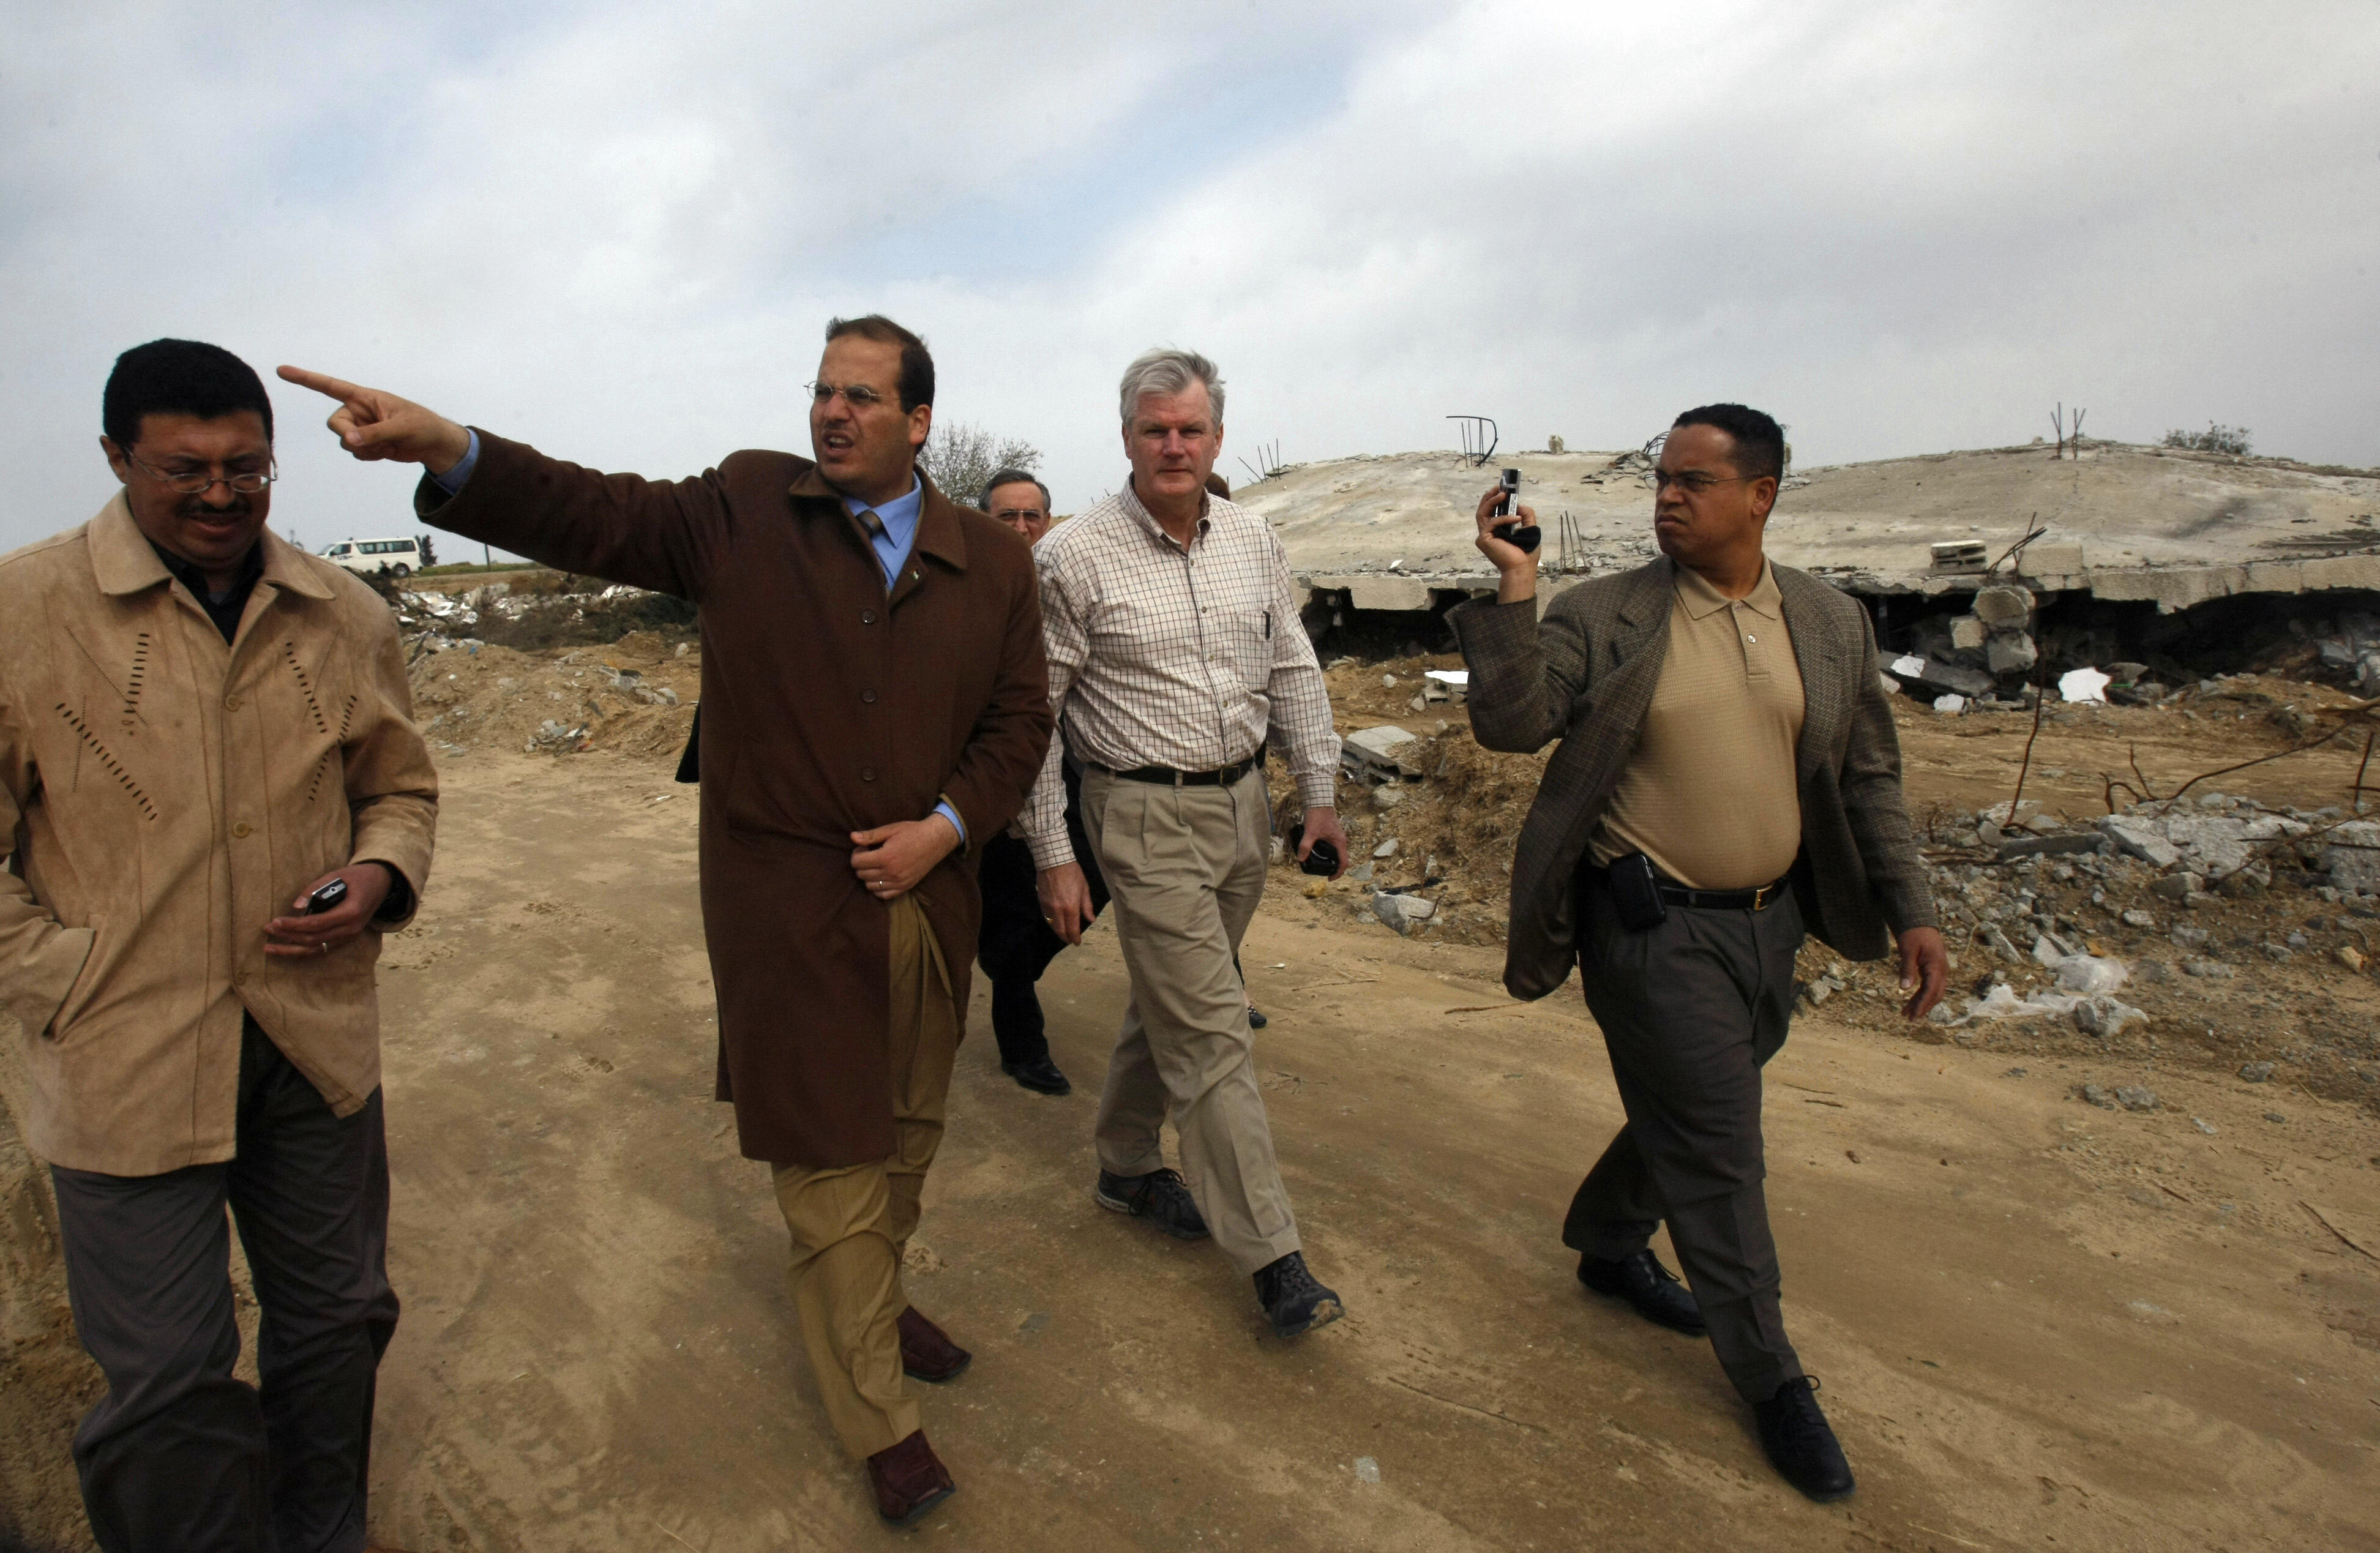 MOHAMMED ABED/AFP/Getty Images. US Democratic Congressmen Keith Ellison (R) and Brian Baird (2nd R) listen to a Palestinian owner of a company that was destroyed during Israel's 22-day offensive during a visit to the Jabalia refugee camp in the northern Gaza Strip.